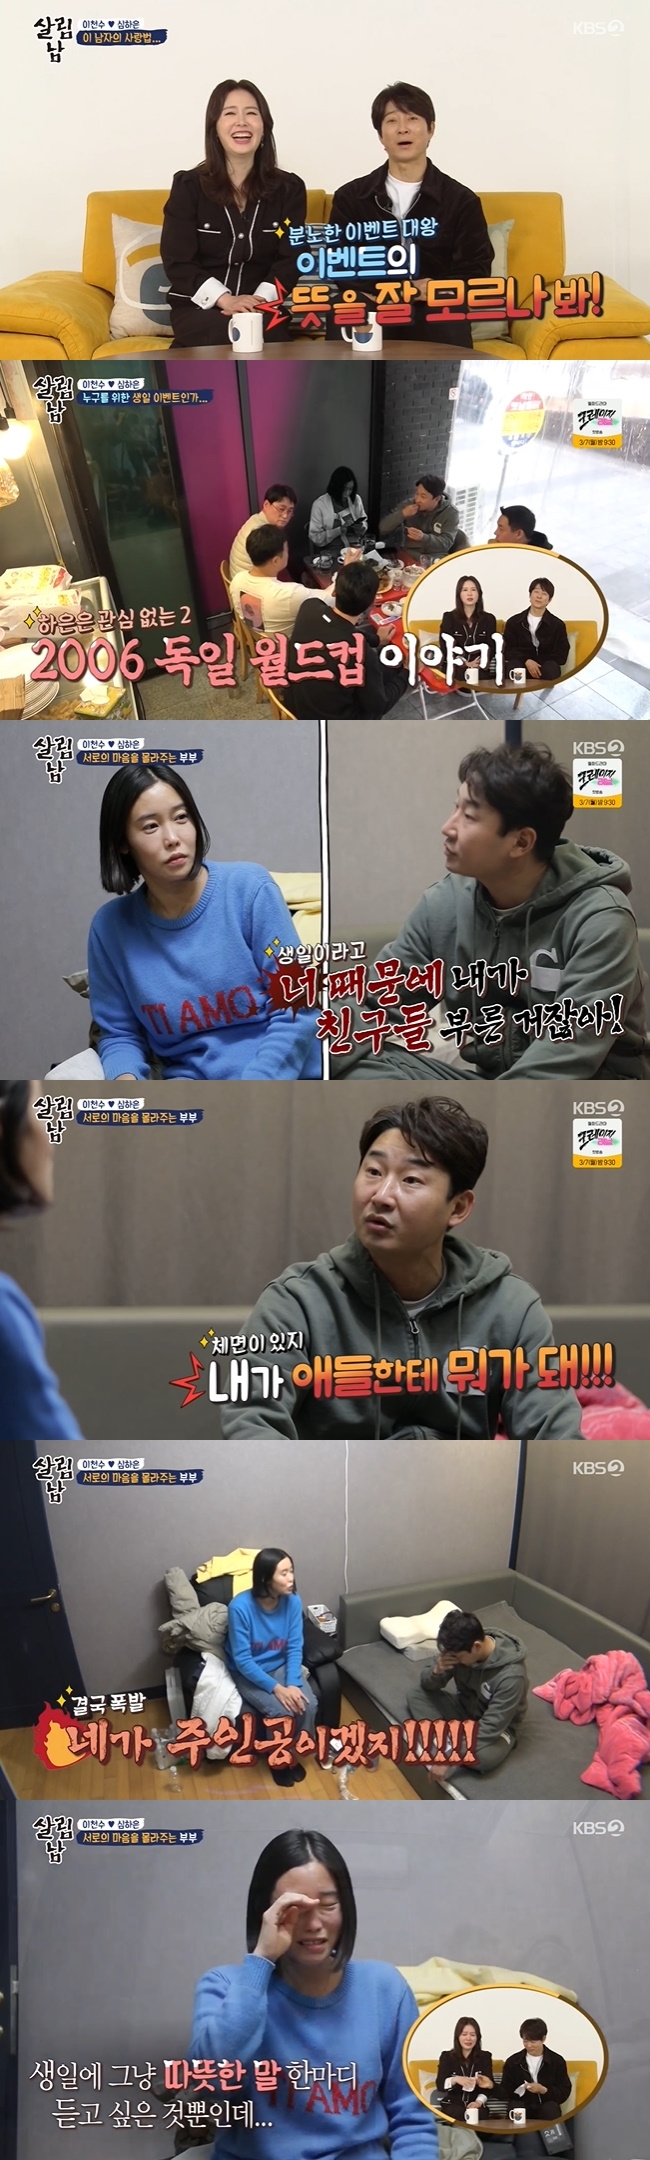 Choi Soo-jong was saddened by Lee Chun-soos anger, which was not counted at all by his wifes feelings.On KBS 2TVs Liver Men Season 2, which aired on February 26, Lee Chun-soo, who forgot his wifes birthday, was shown preparing for the event late.Lee Chun-soo, who had been serving side dishes since morning, went to his room, saying that he was sustained even though he knew that it was his wifes birthday late.Daughter Lee Ju-eun offered her dad a kimchi she gave to her mother, who boiled ramen noodles alone in the room, and suggested she go out for a dinner date.Shim Ha-eun, wife who expected to eat a meeting on Lee Chun-soos date application, was disappointed to see her husband who led her to a local chicken house.Even Lee Chun-soo had unilaterally called his acquaintance.Choi Soo-jong said, I dont know what the event means. Even if its a chicken house, you should contact someone your wife wants to see and get the friends together.This Man from Nowhere really .Shim Ha-eun came home first because of Lee Chun-soo, who talks to acquaintances without thinking about himself from the army to the World Cup story.Lee Chun-soo, who came home late, burst out, pointing out that Shim Ha-euns attitude, which went silent, was not polite.When Lee Chun-soo entered the room and became angry with Shim Ha-euns attitude, Choi Soo-jong lamented, This is a total difficulty.Lee Chun-soo said, I called the children because of you. You just go if you have seen the children funny.I took you to your favorite place to let you go and called the kids. You just ignored them. What am I to them?You havent seen your friends in the eyes, Shim Ha-eun said. They were embarrassed.I was the main character, and today my brother was the most exciting, and I came home, but he didnt have a phone call, and he had more drinks.Lee Chun-soo said, You went first, so I came back, and you went away politely, and thats what happened.